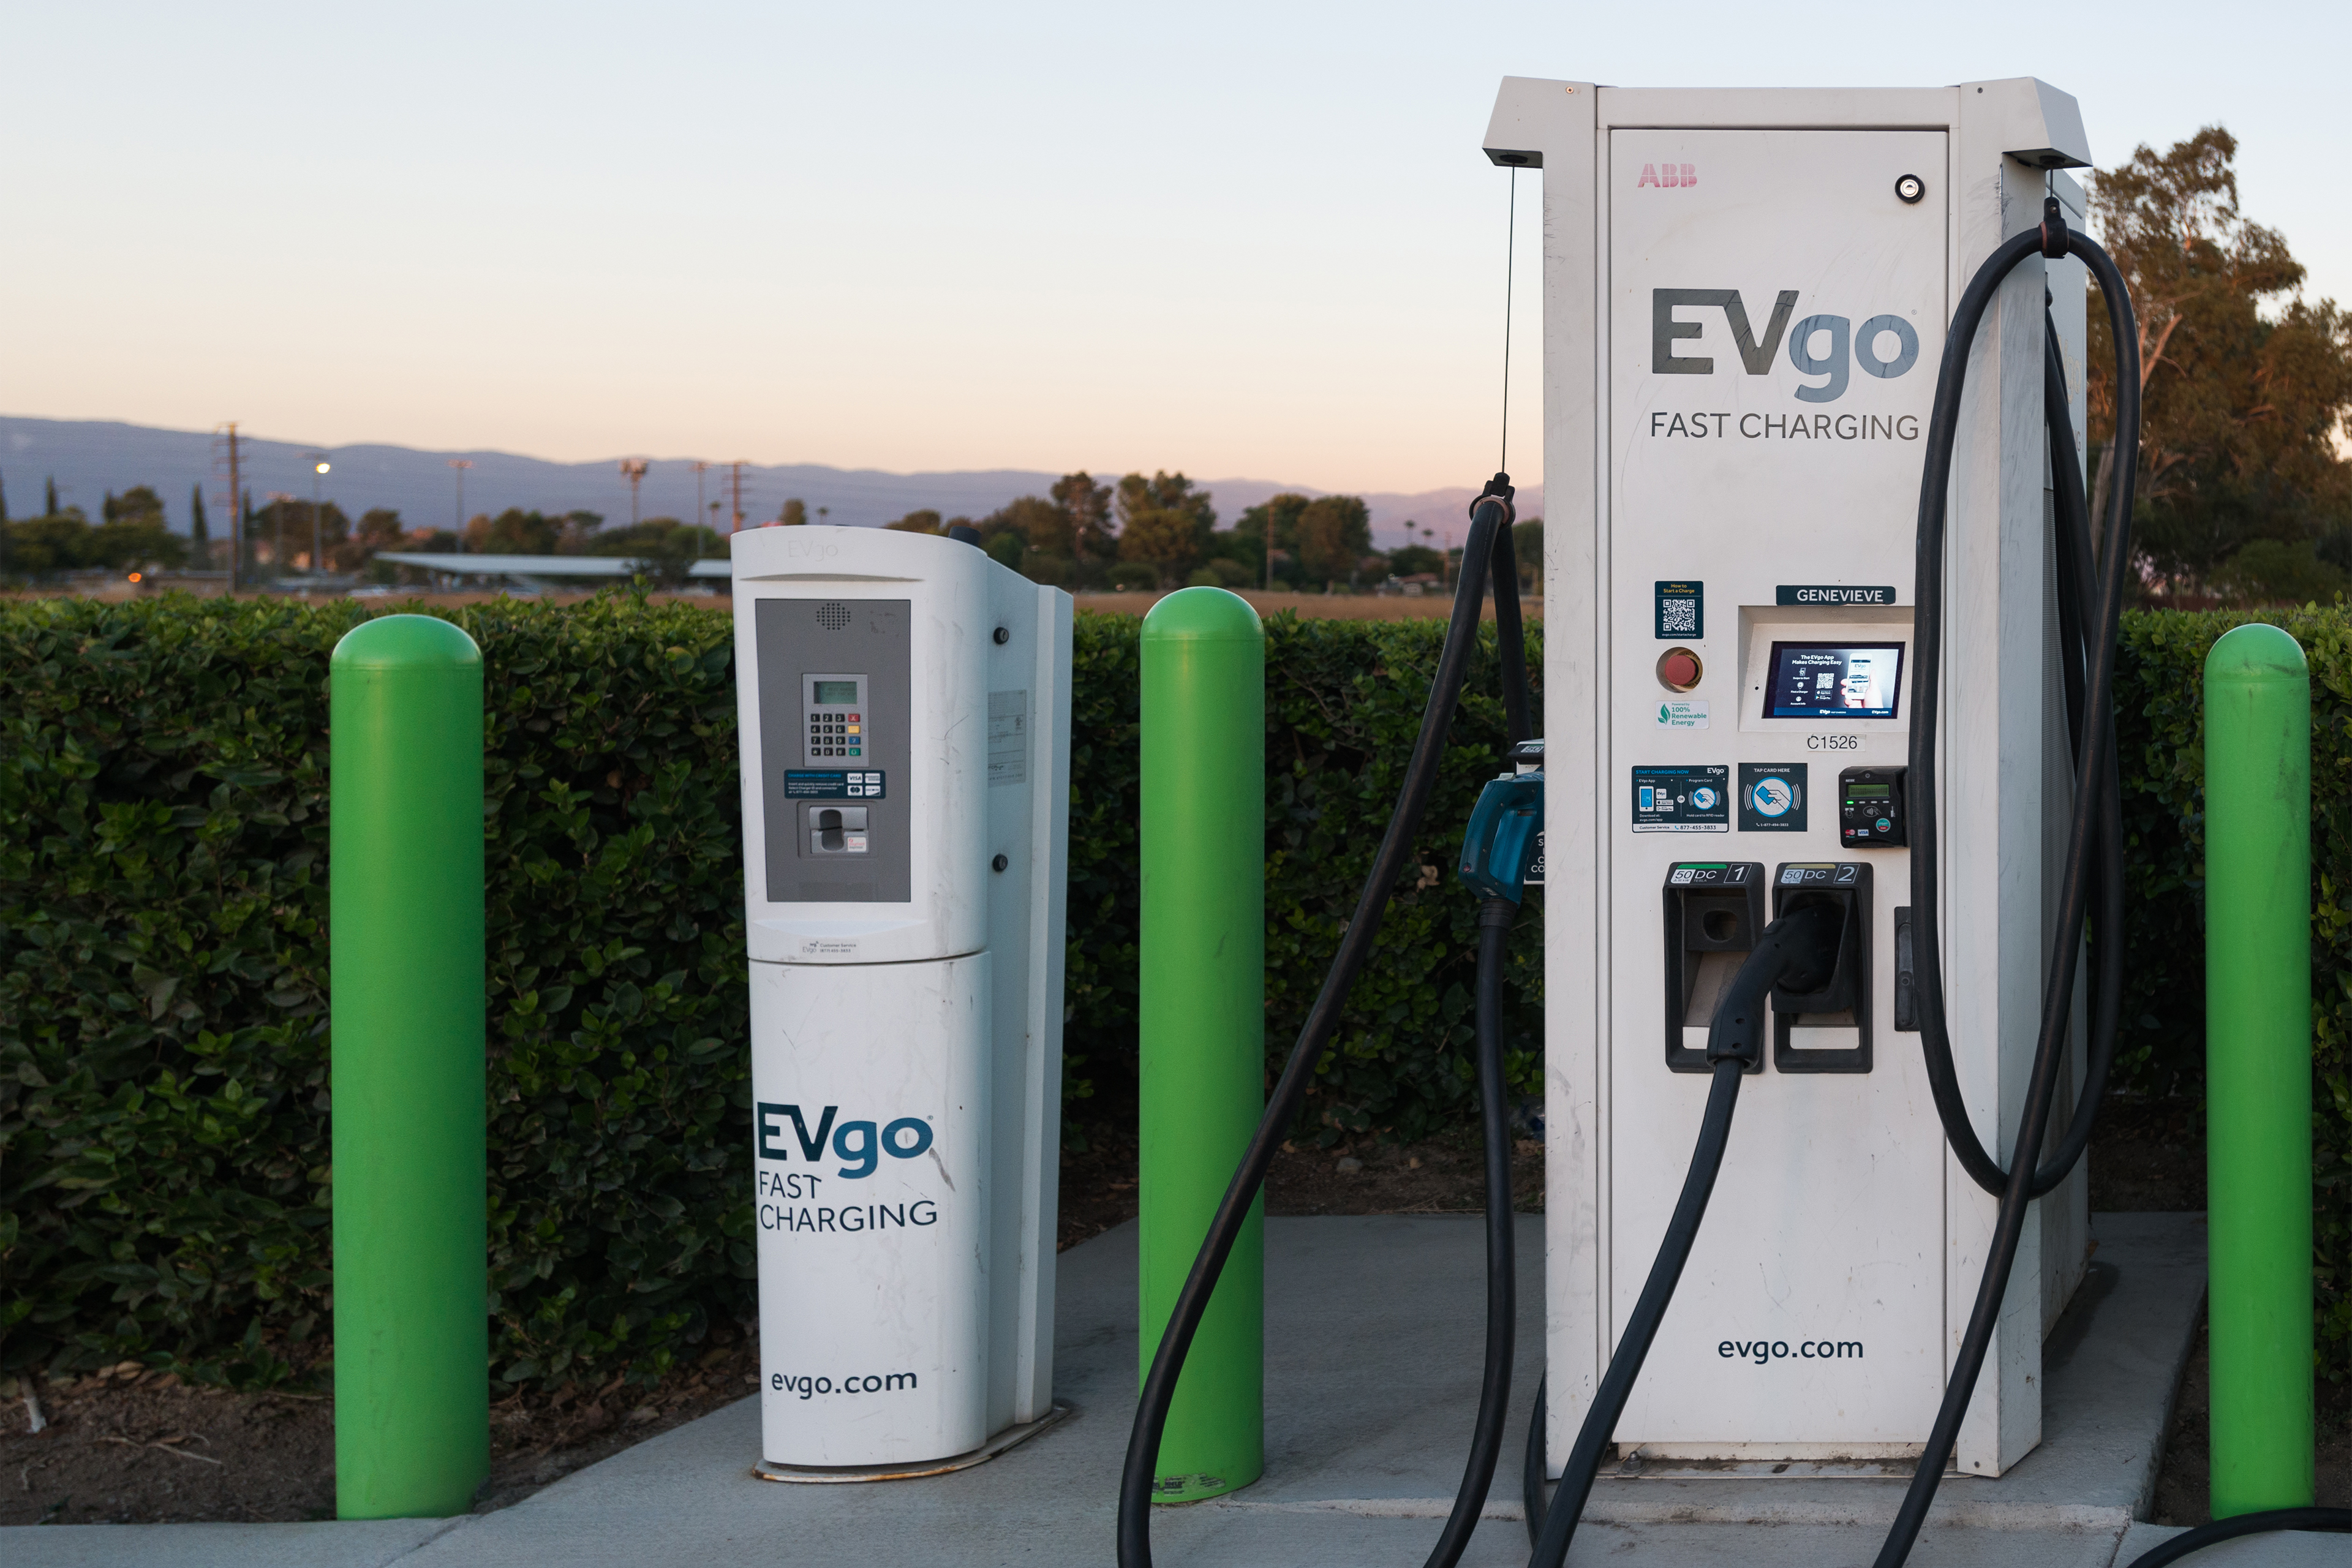 A photo shows an electric vehicle charging station.